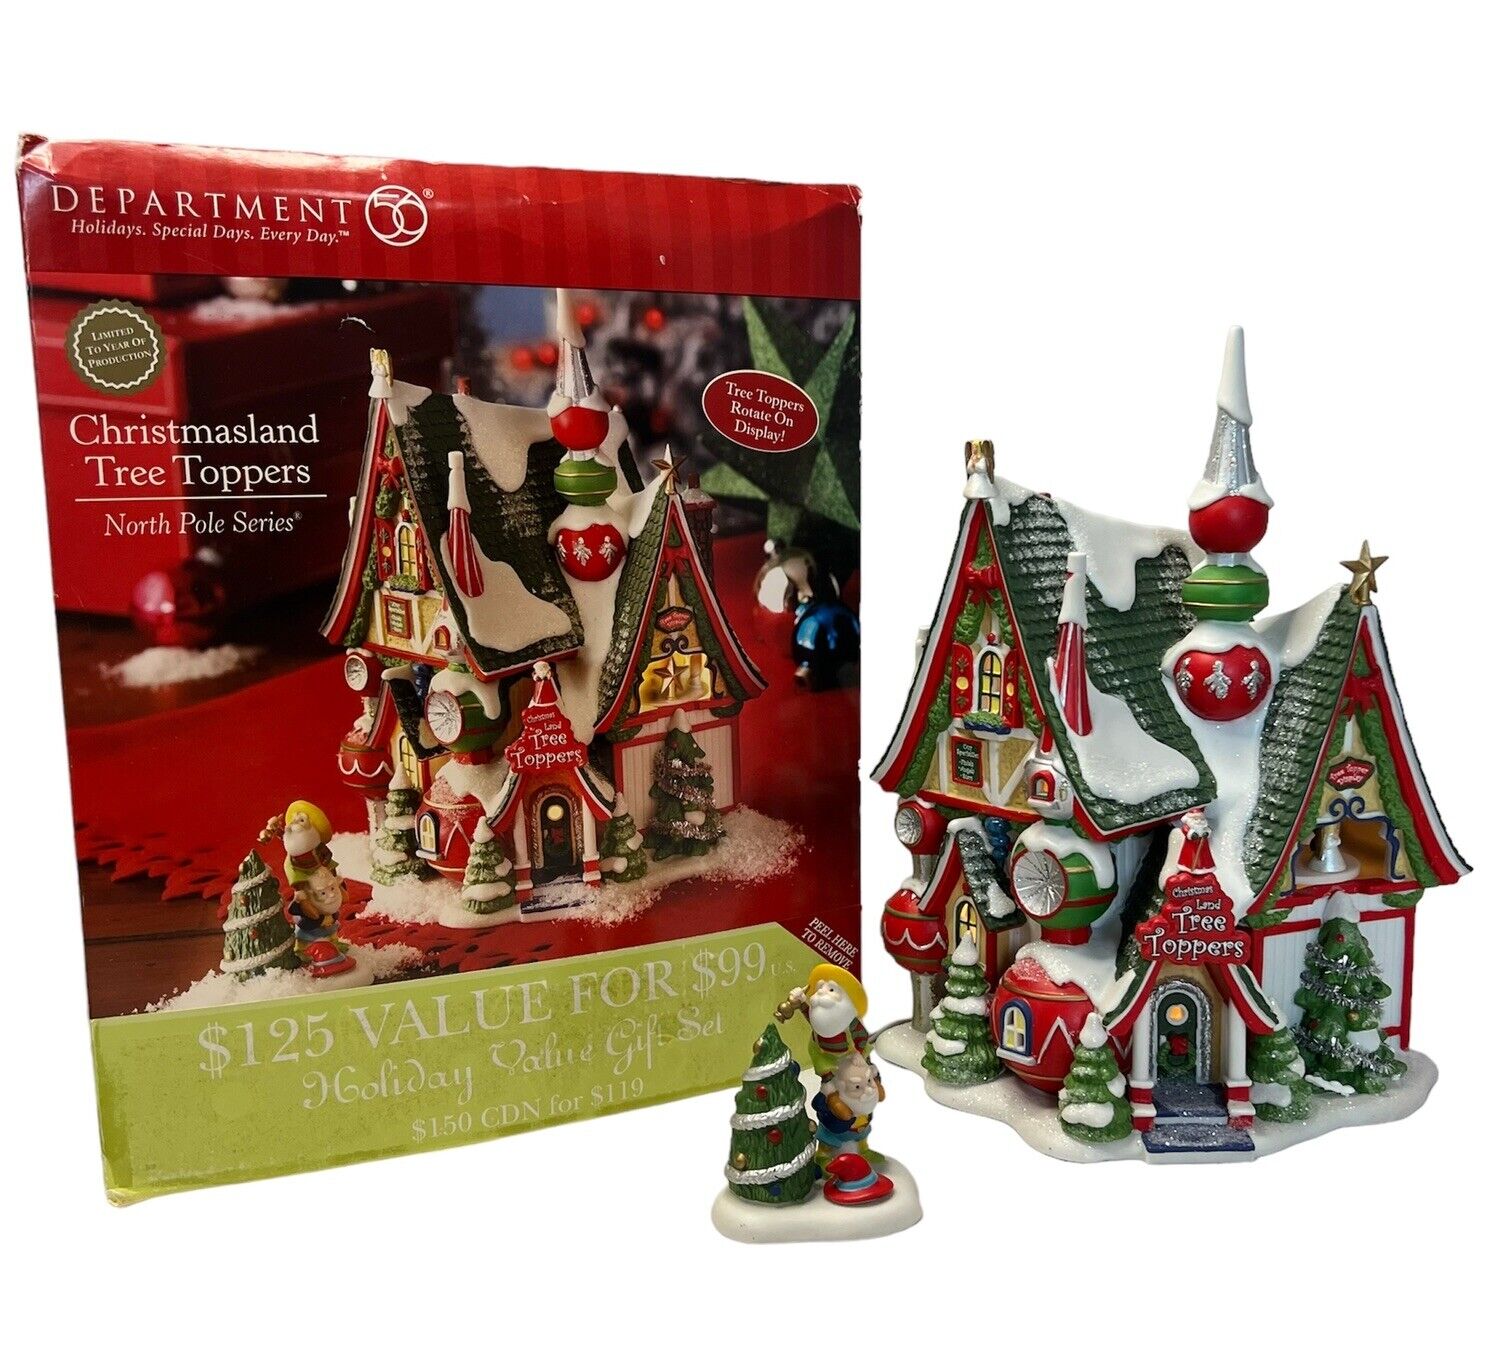 Department Dept. 56 North Pole Series Christmasland Tree Toppers Rotating House